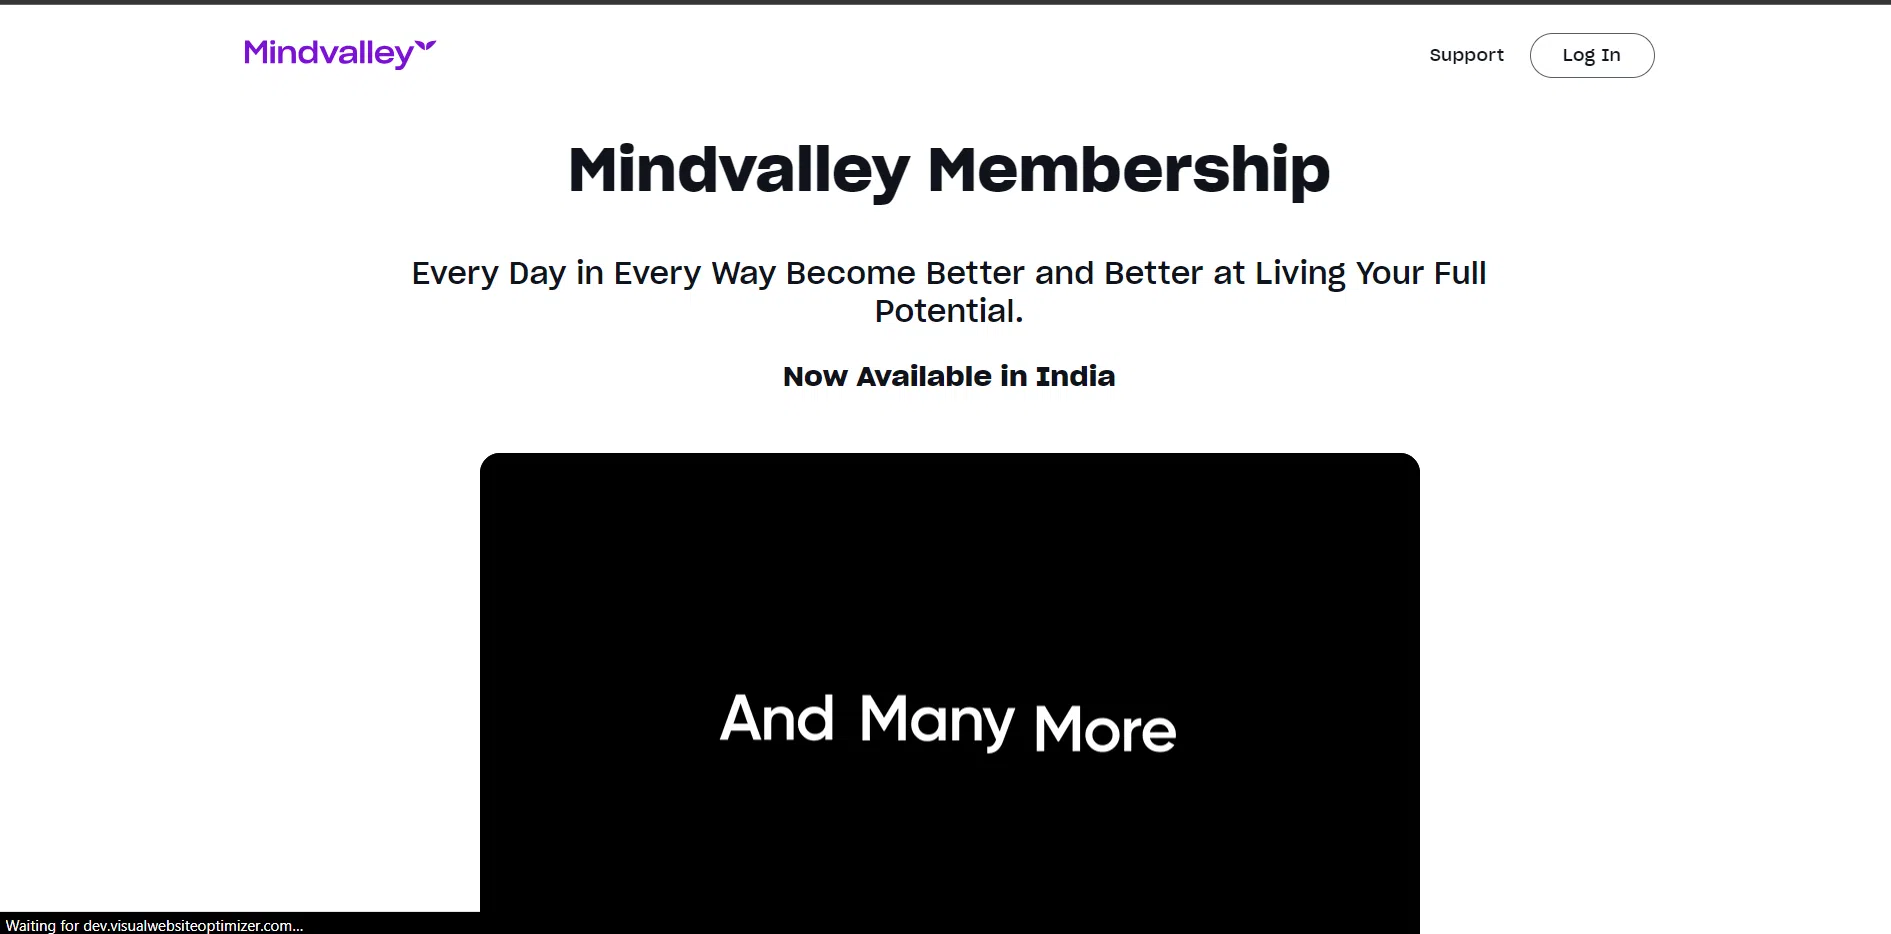 Mindvalley overview